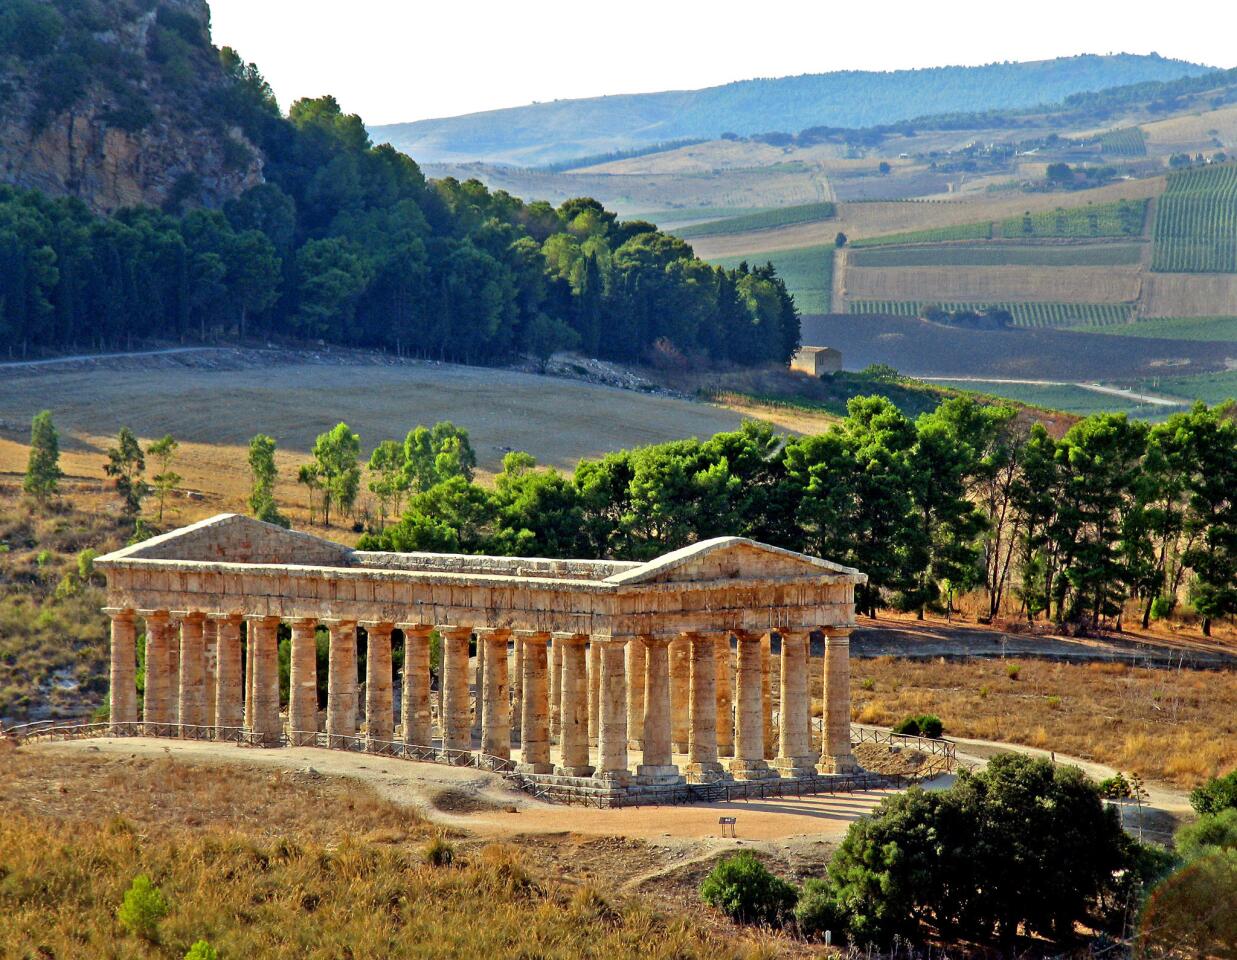 The temple at Segesta, thought to date from the 5th century BC, was built by the ancient Elymians, whose language and origin remain a mystery. Read more: Western Sicily, where centuries and cultures converge